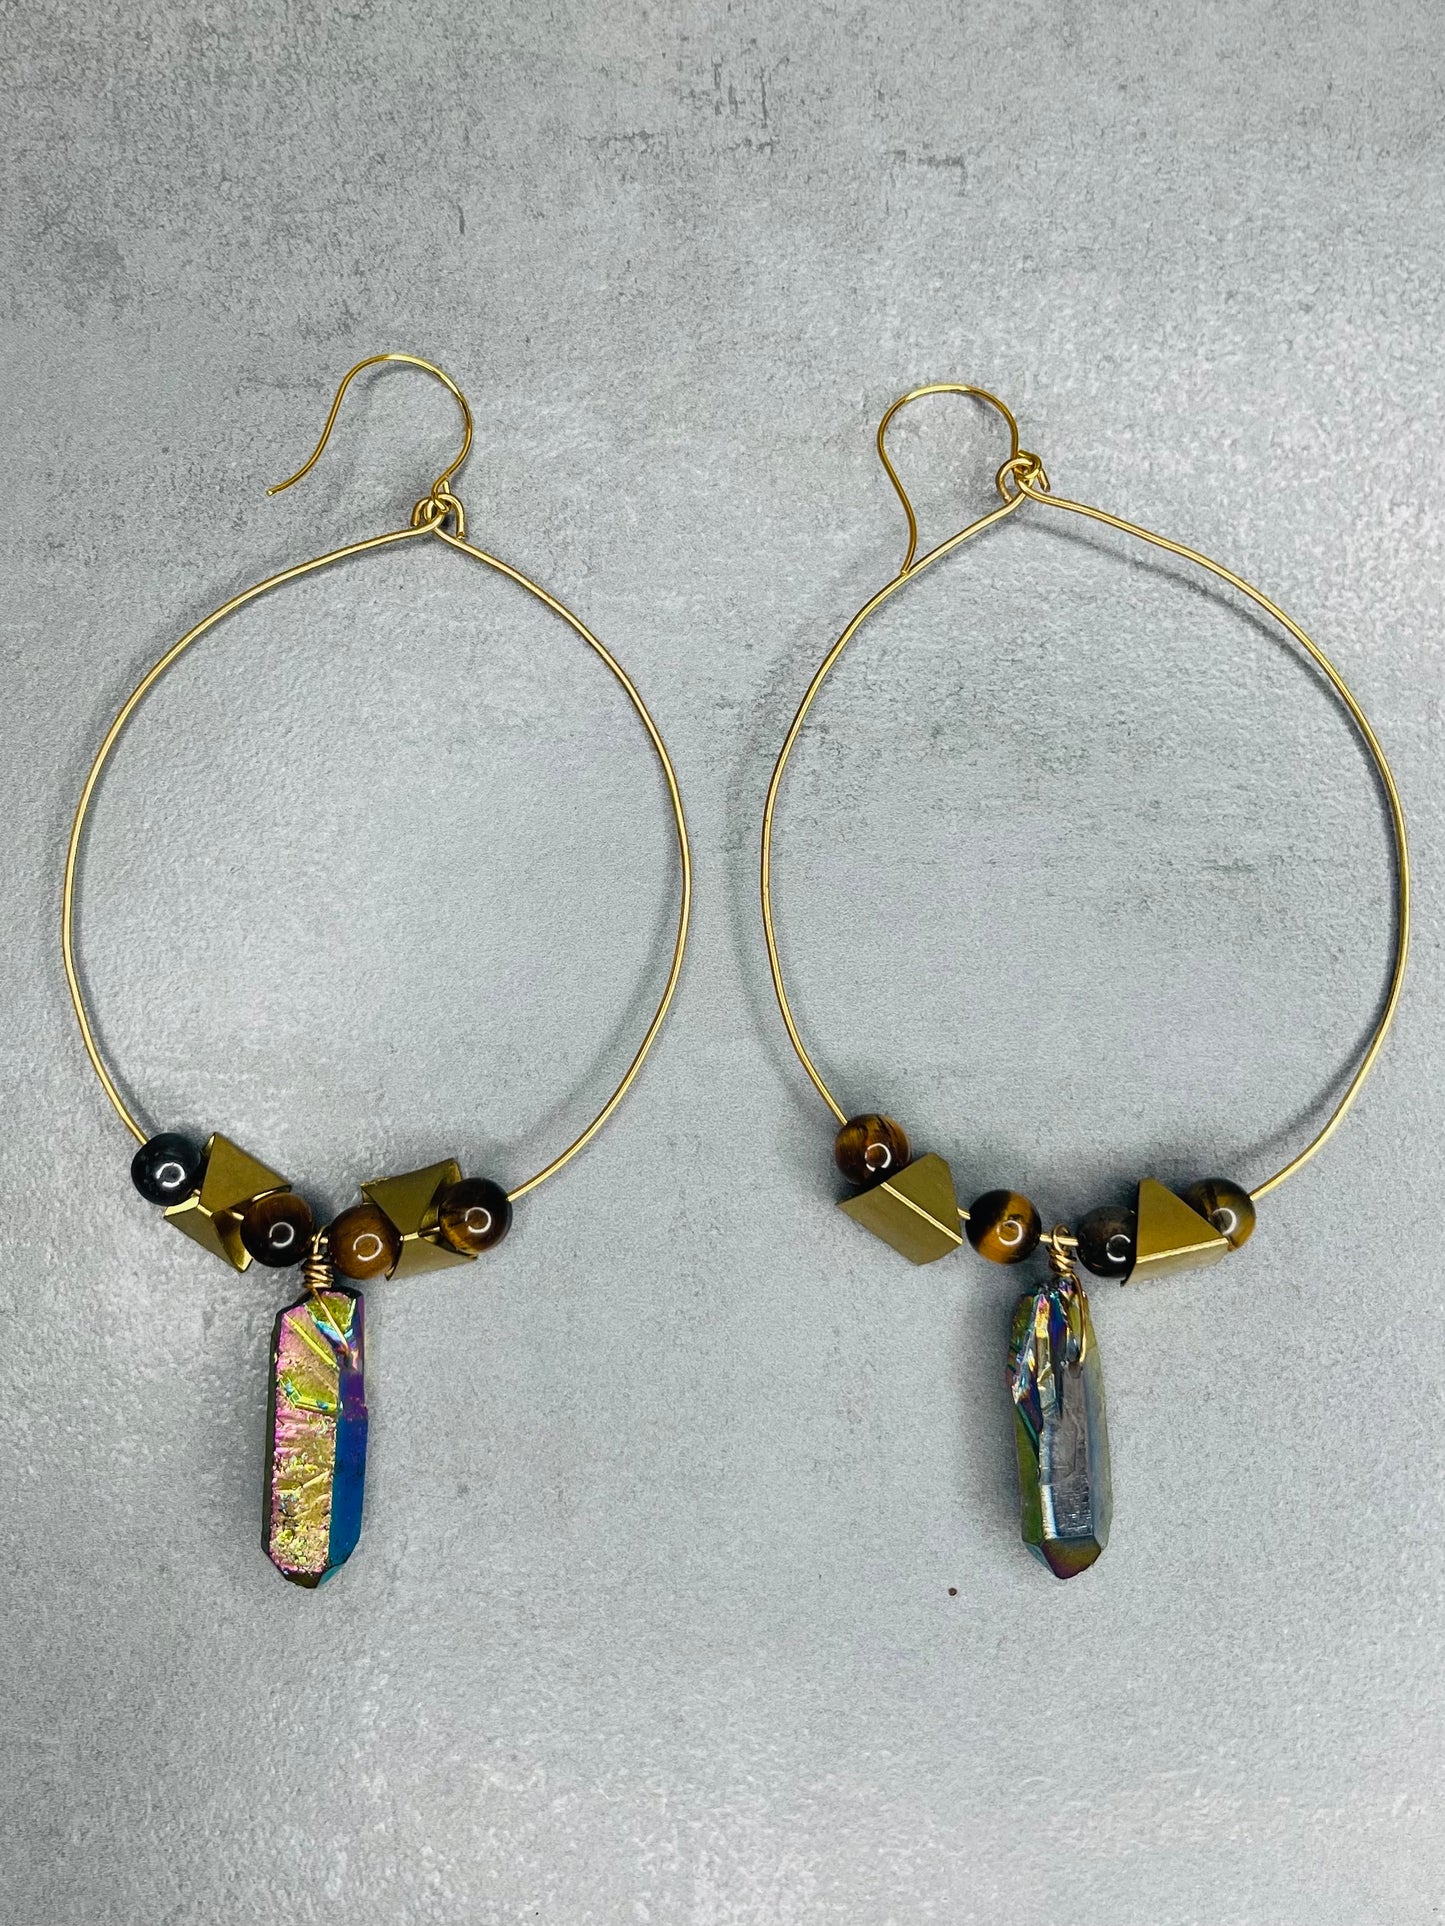 “EXTRA” Large Hoops Soul Chains Earrings- Titanium dipped clear Quartz